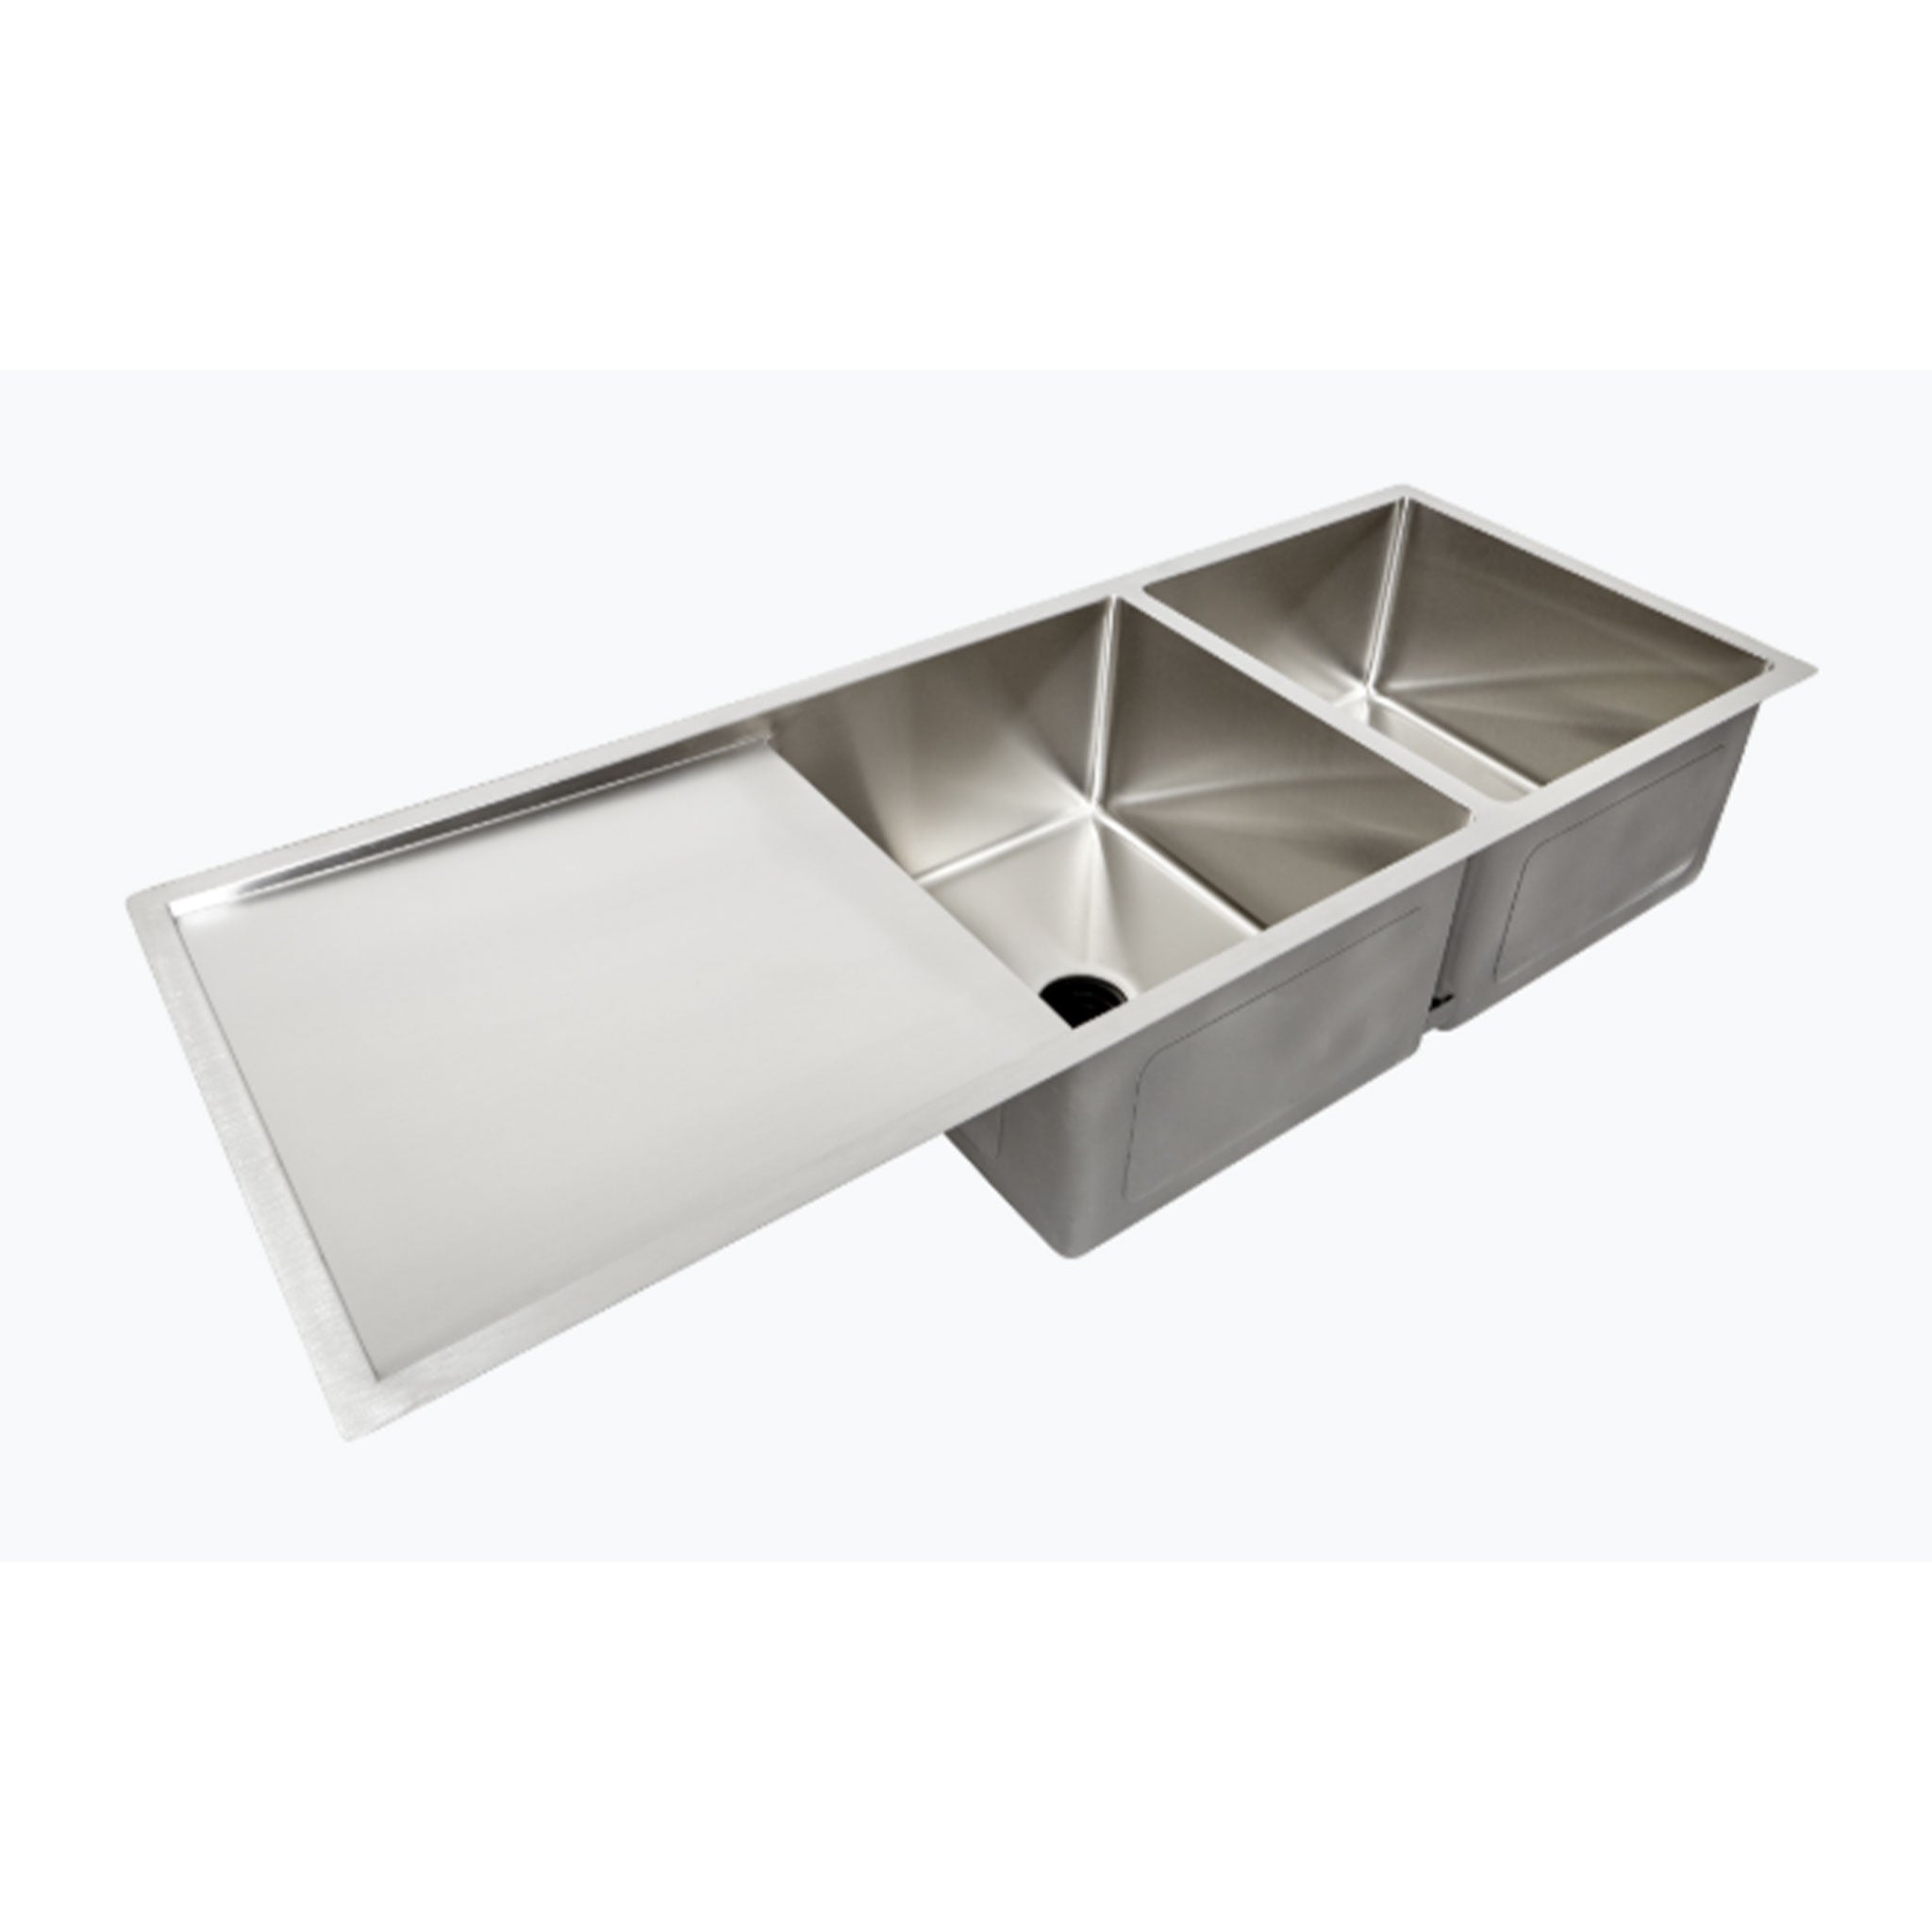 52" double basin 16 gauge stainless steel undermount kitchen sink with large drainboard to fit over dishwasher